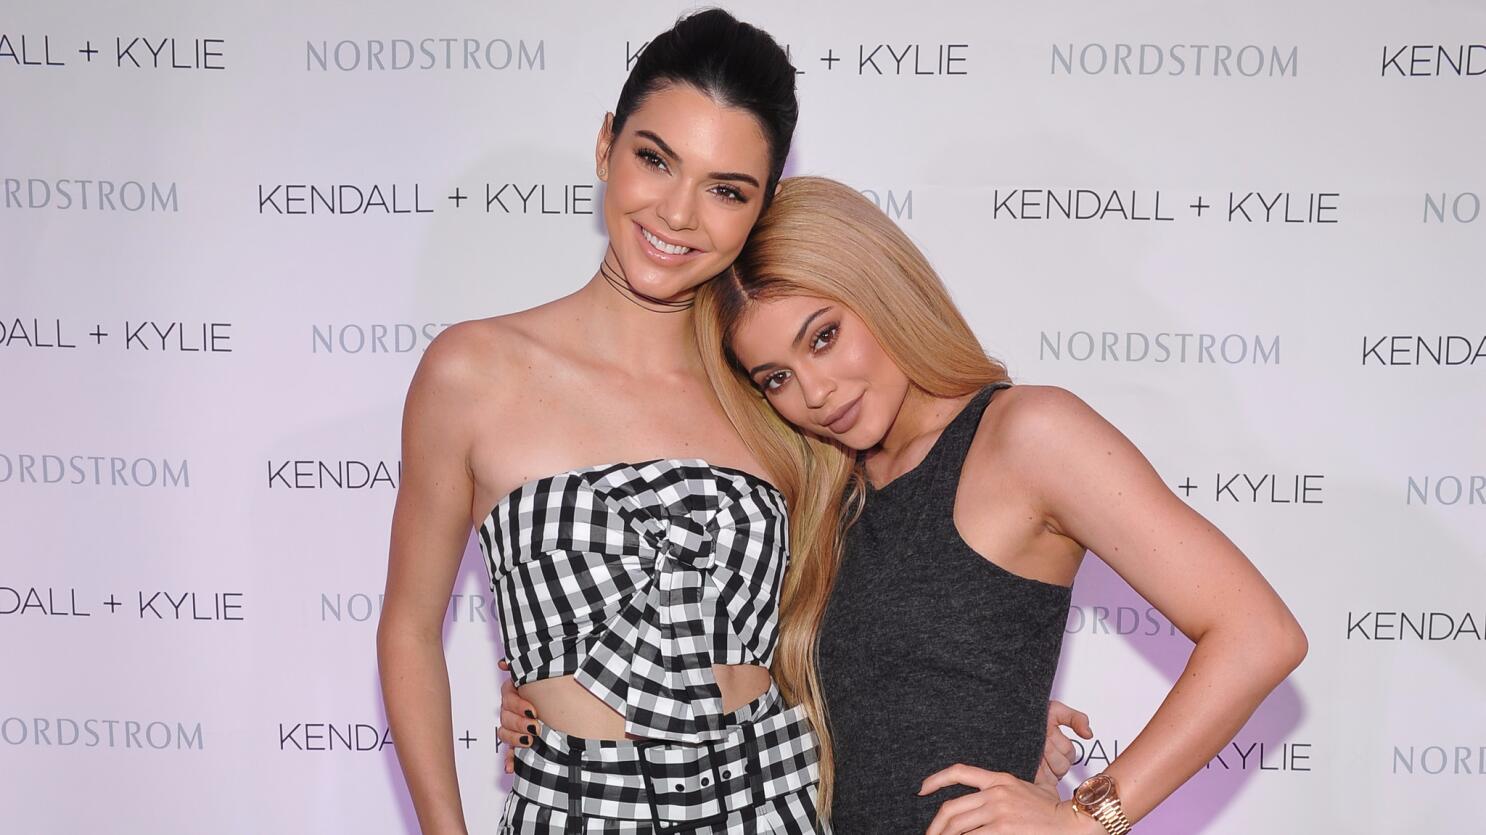 Kendall + Kylie News, Collections, Fashion Shows, Fashion Week Reviews, and  More